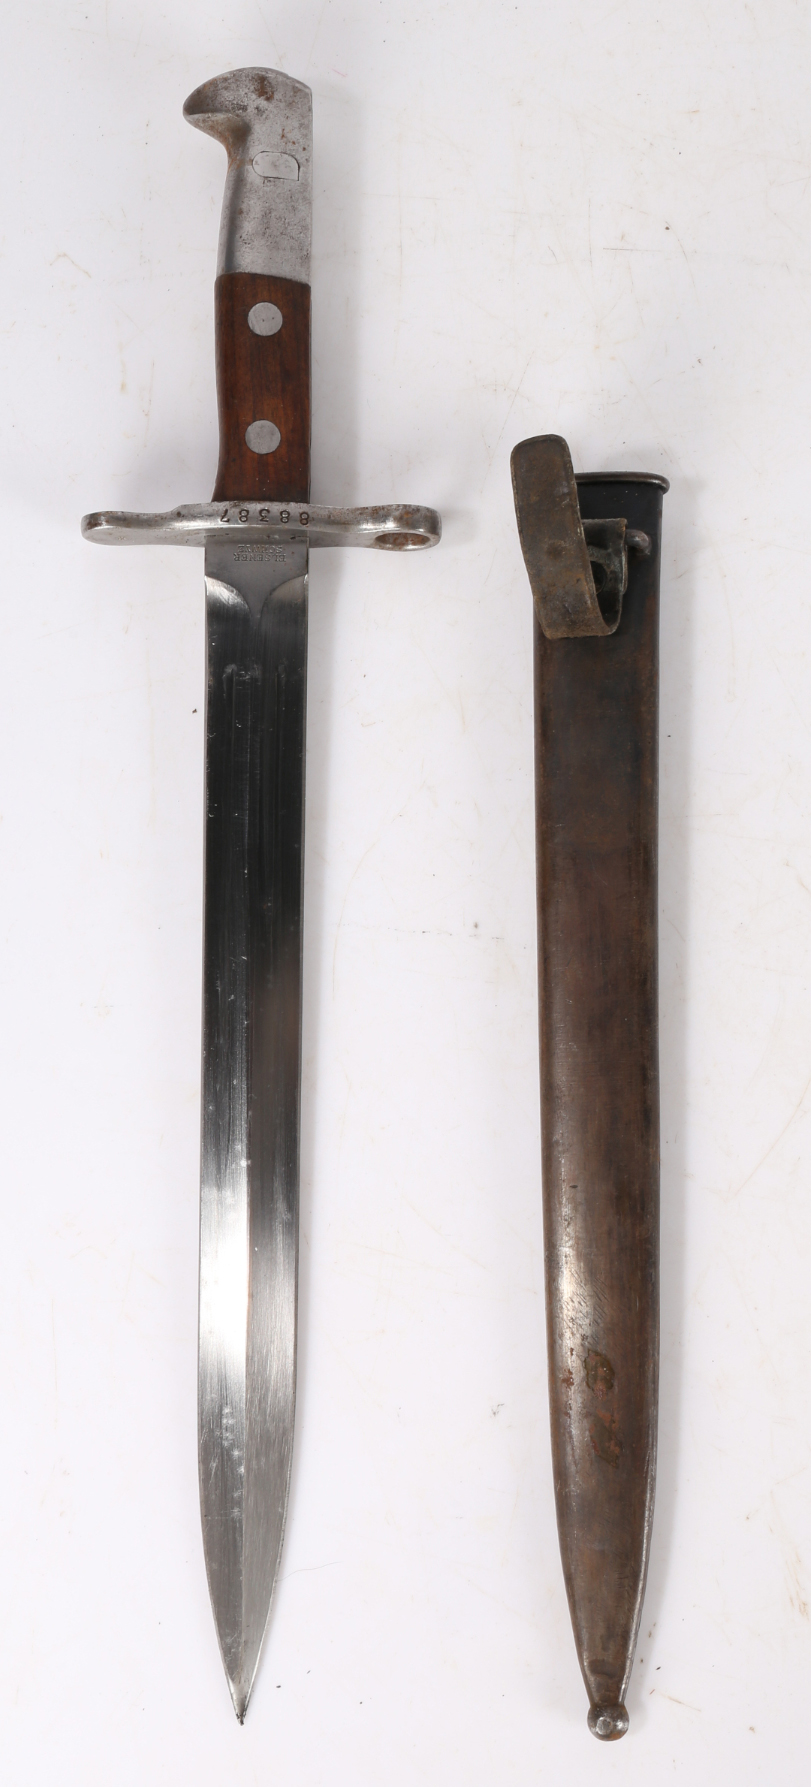 Swiss M1918 pattern double edged knife bayonet for use on the 7.5 mm Schmidt-Rubin M1911 carbine and - Image 3 of 3